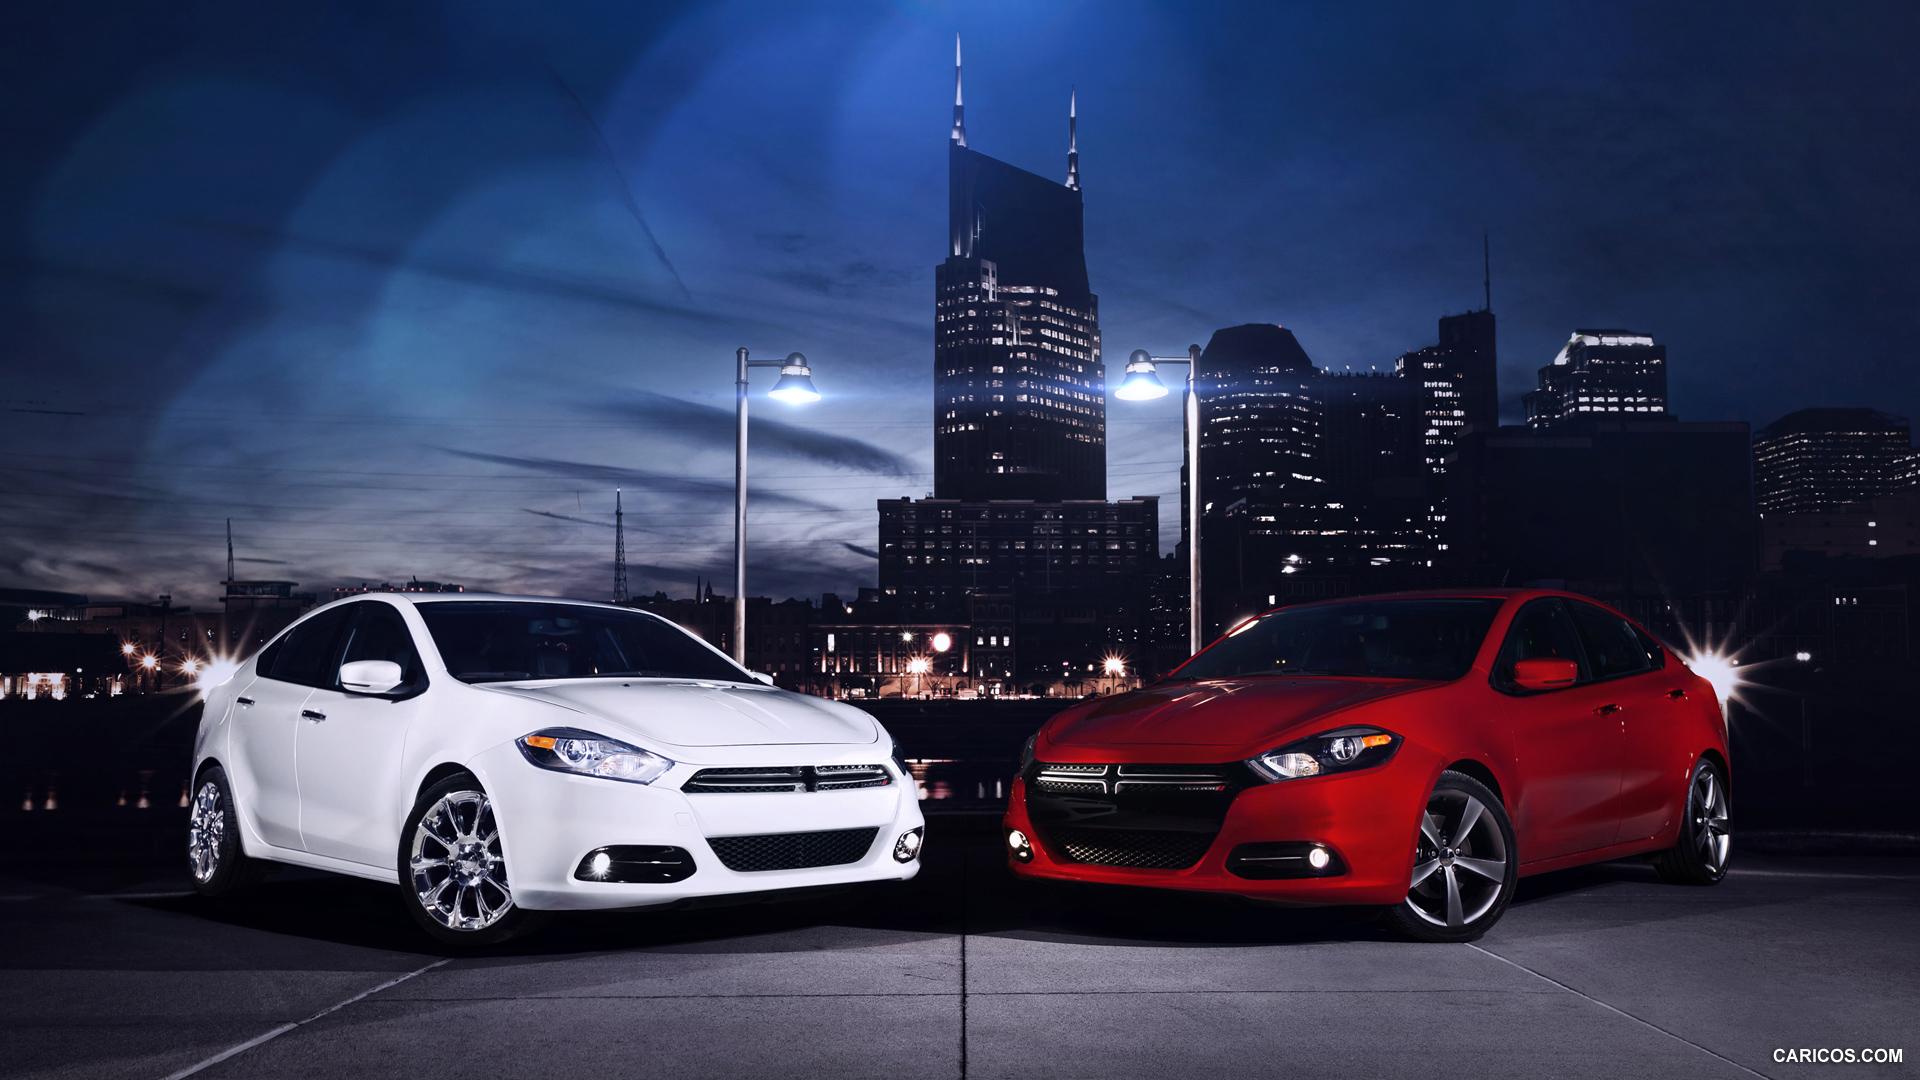 Dodge Dart White and Red. HD Wallpaper